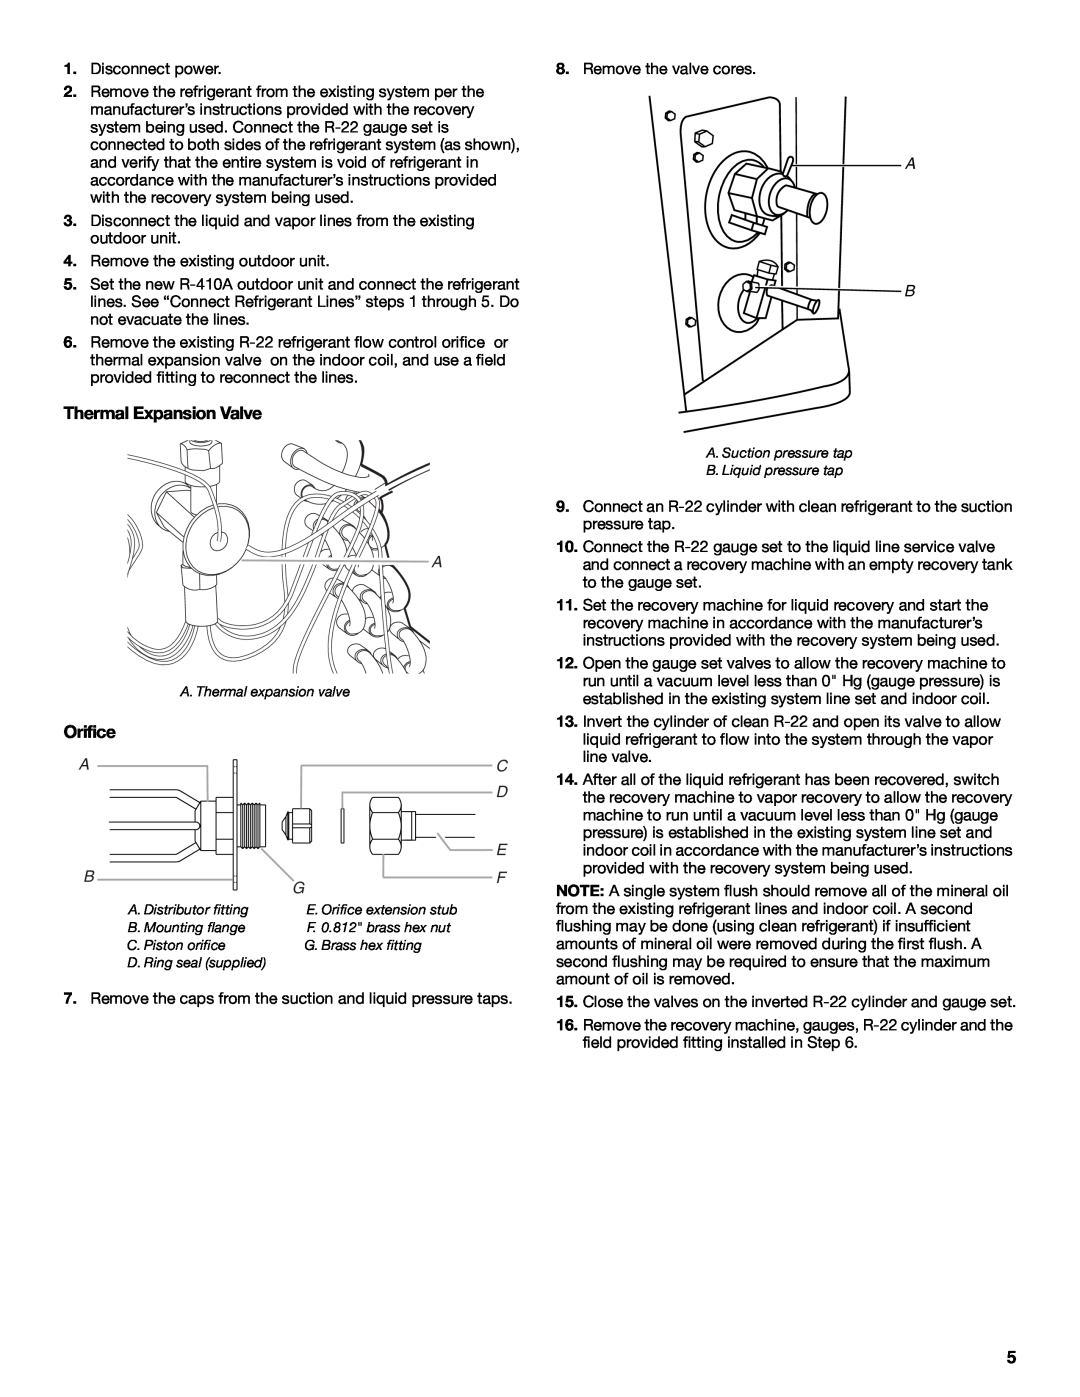 Whirlpool W4GH6 installation instructions Thermal Expansion Valve, Orifice 